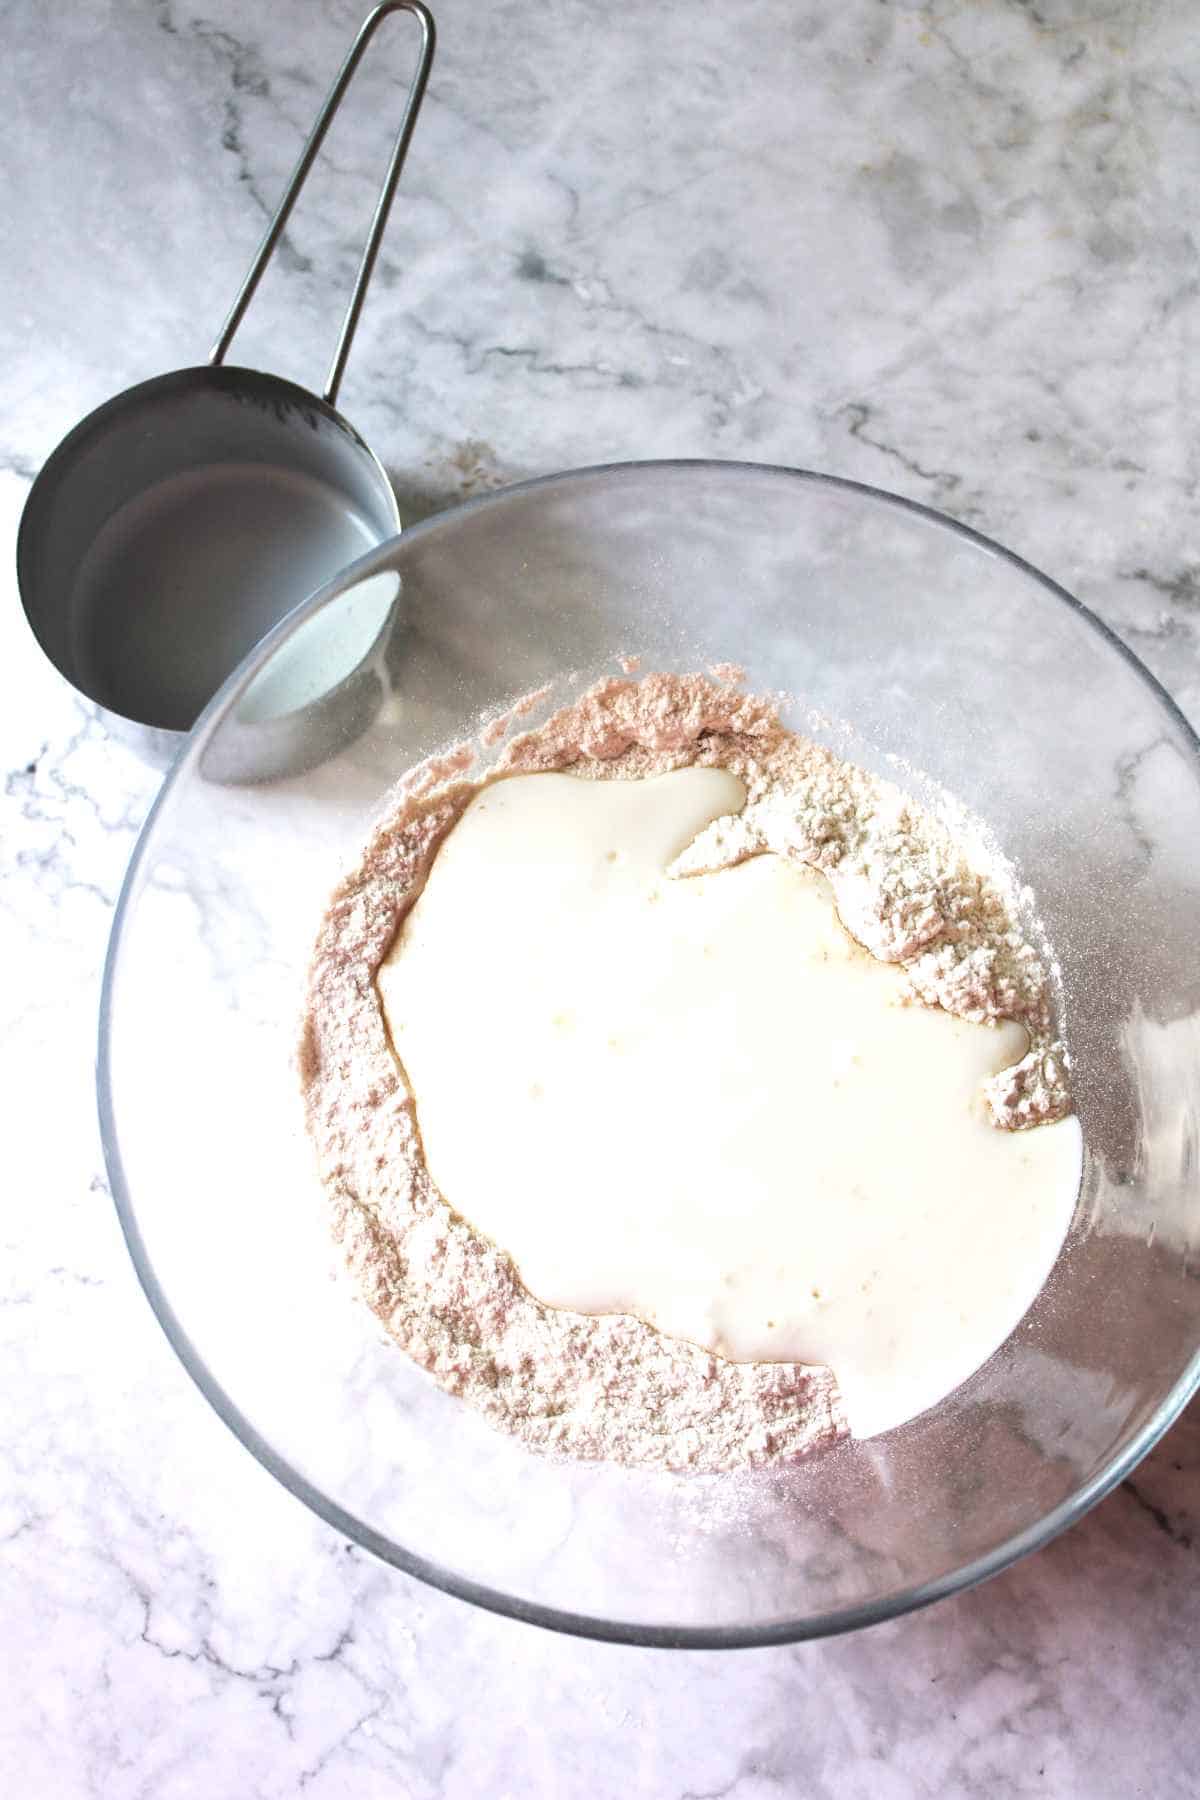 flour, milk and yeast in a bowl.